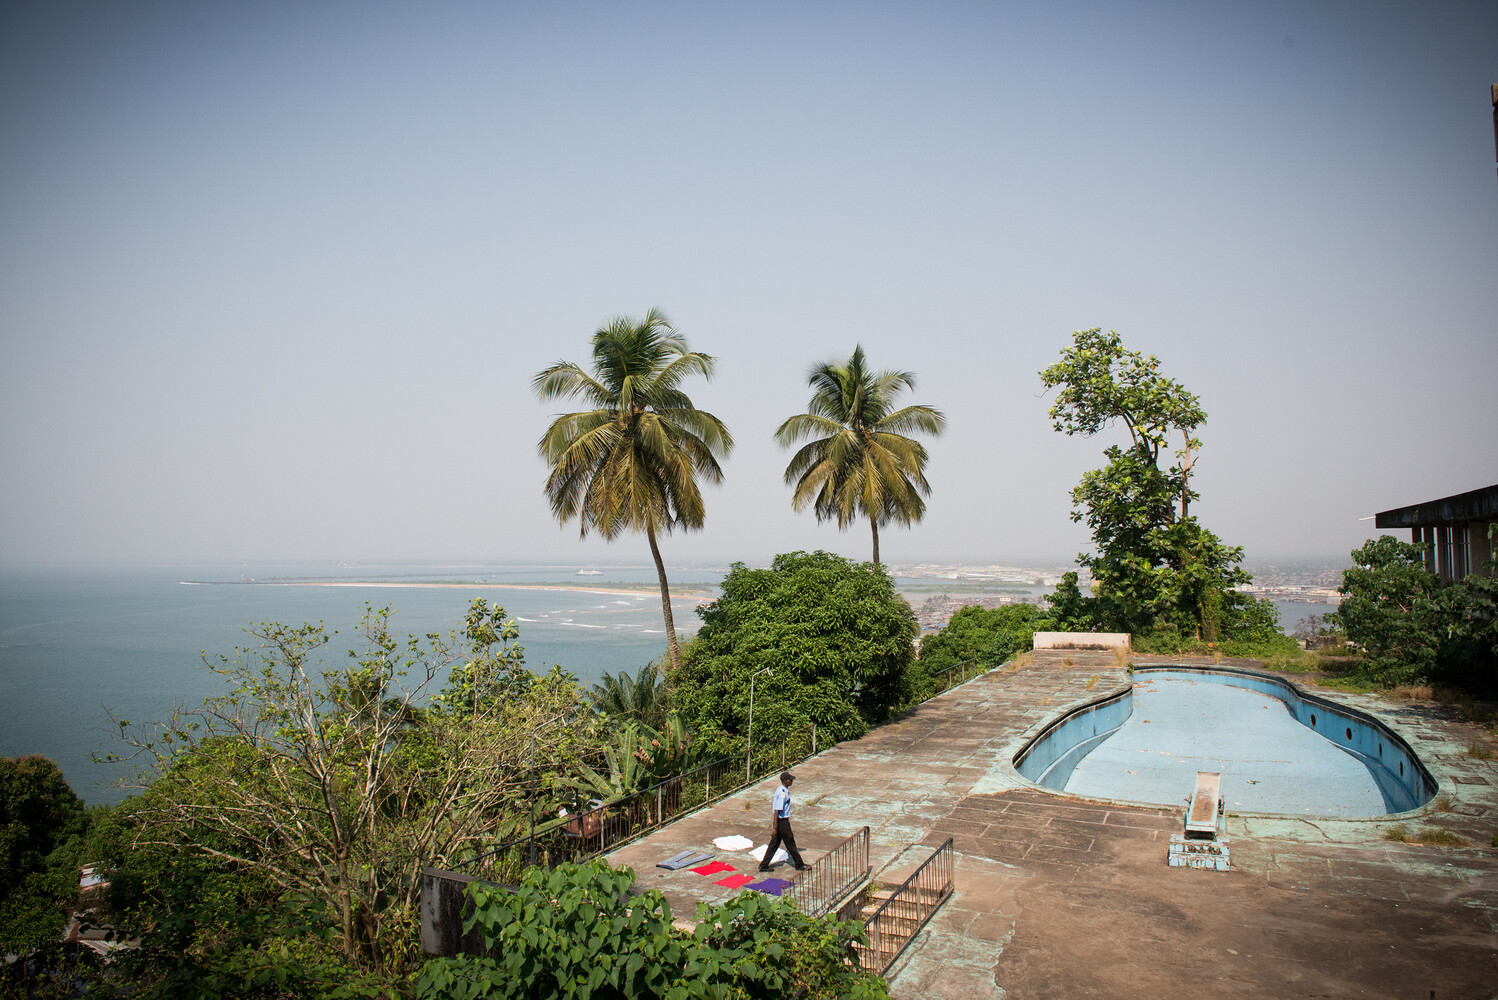 View of the Atlantic Ocean from Hotel Ducor located at the highest point of Liberia's capital city, Monrovia